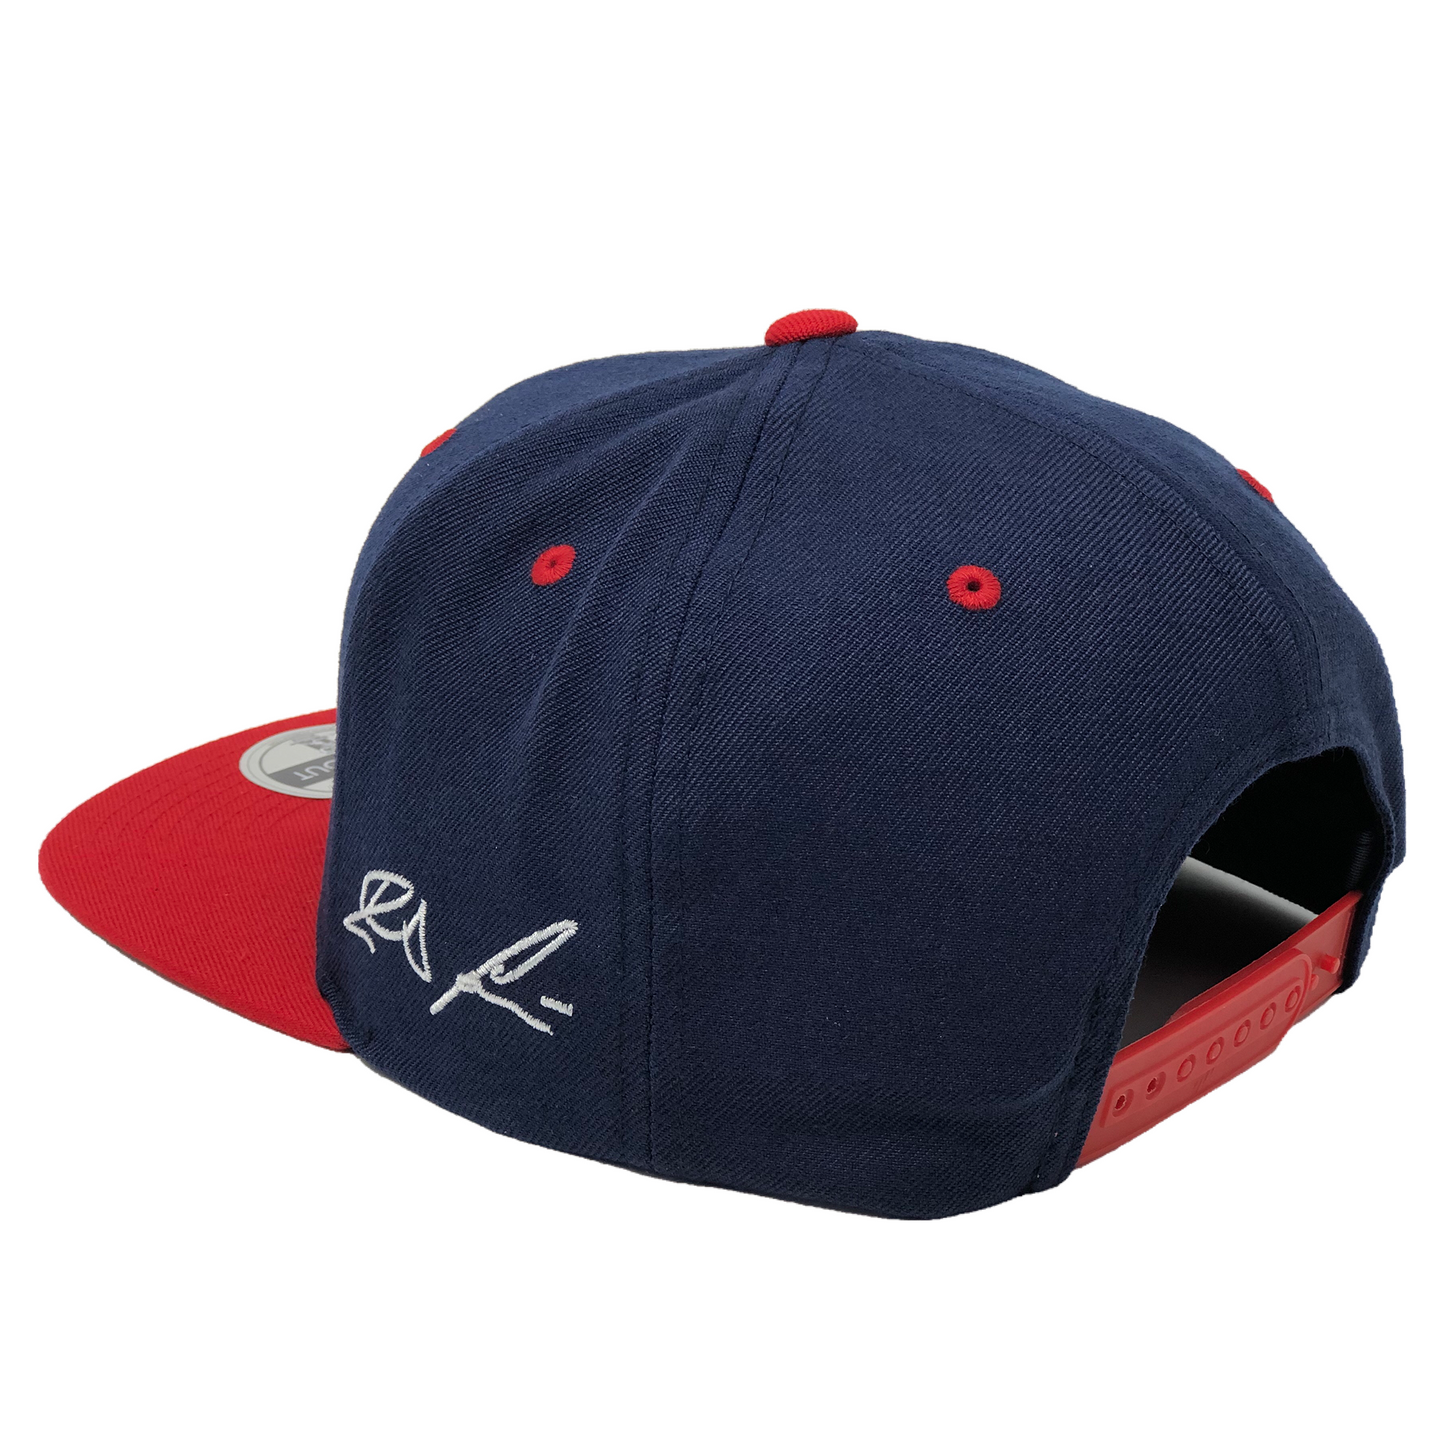 Ronald Acuna Jr Compass Hat - Navy/Red Snapback